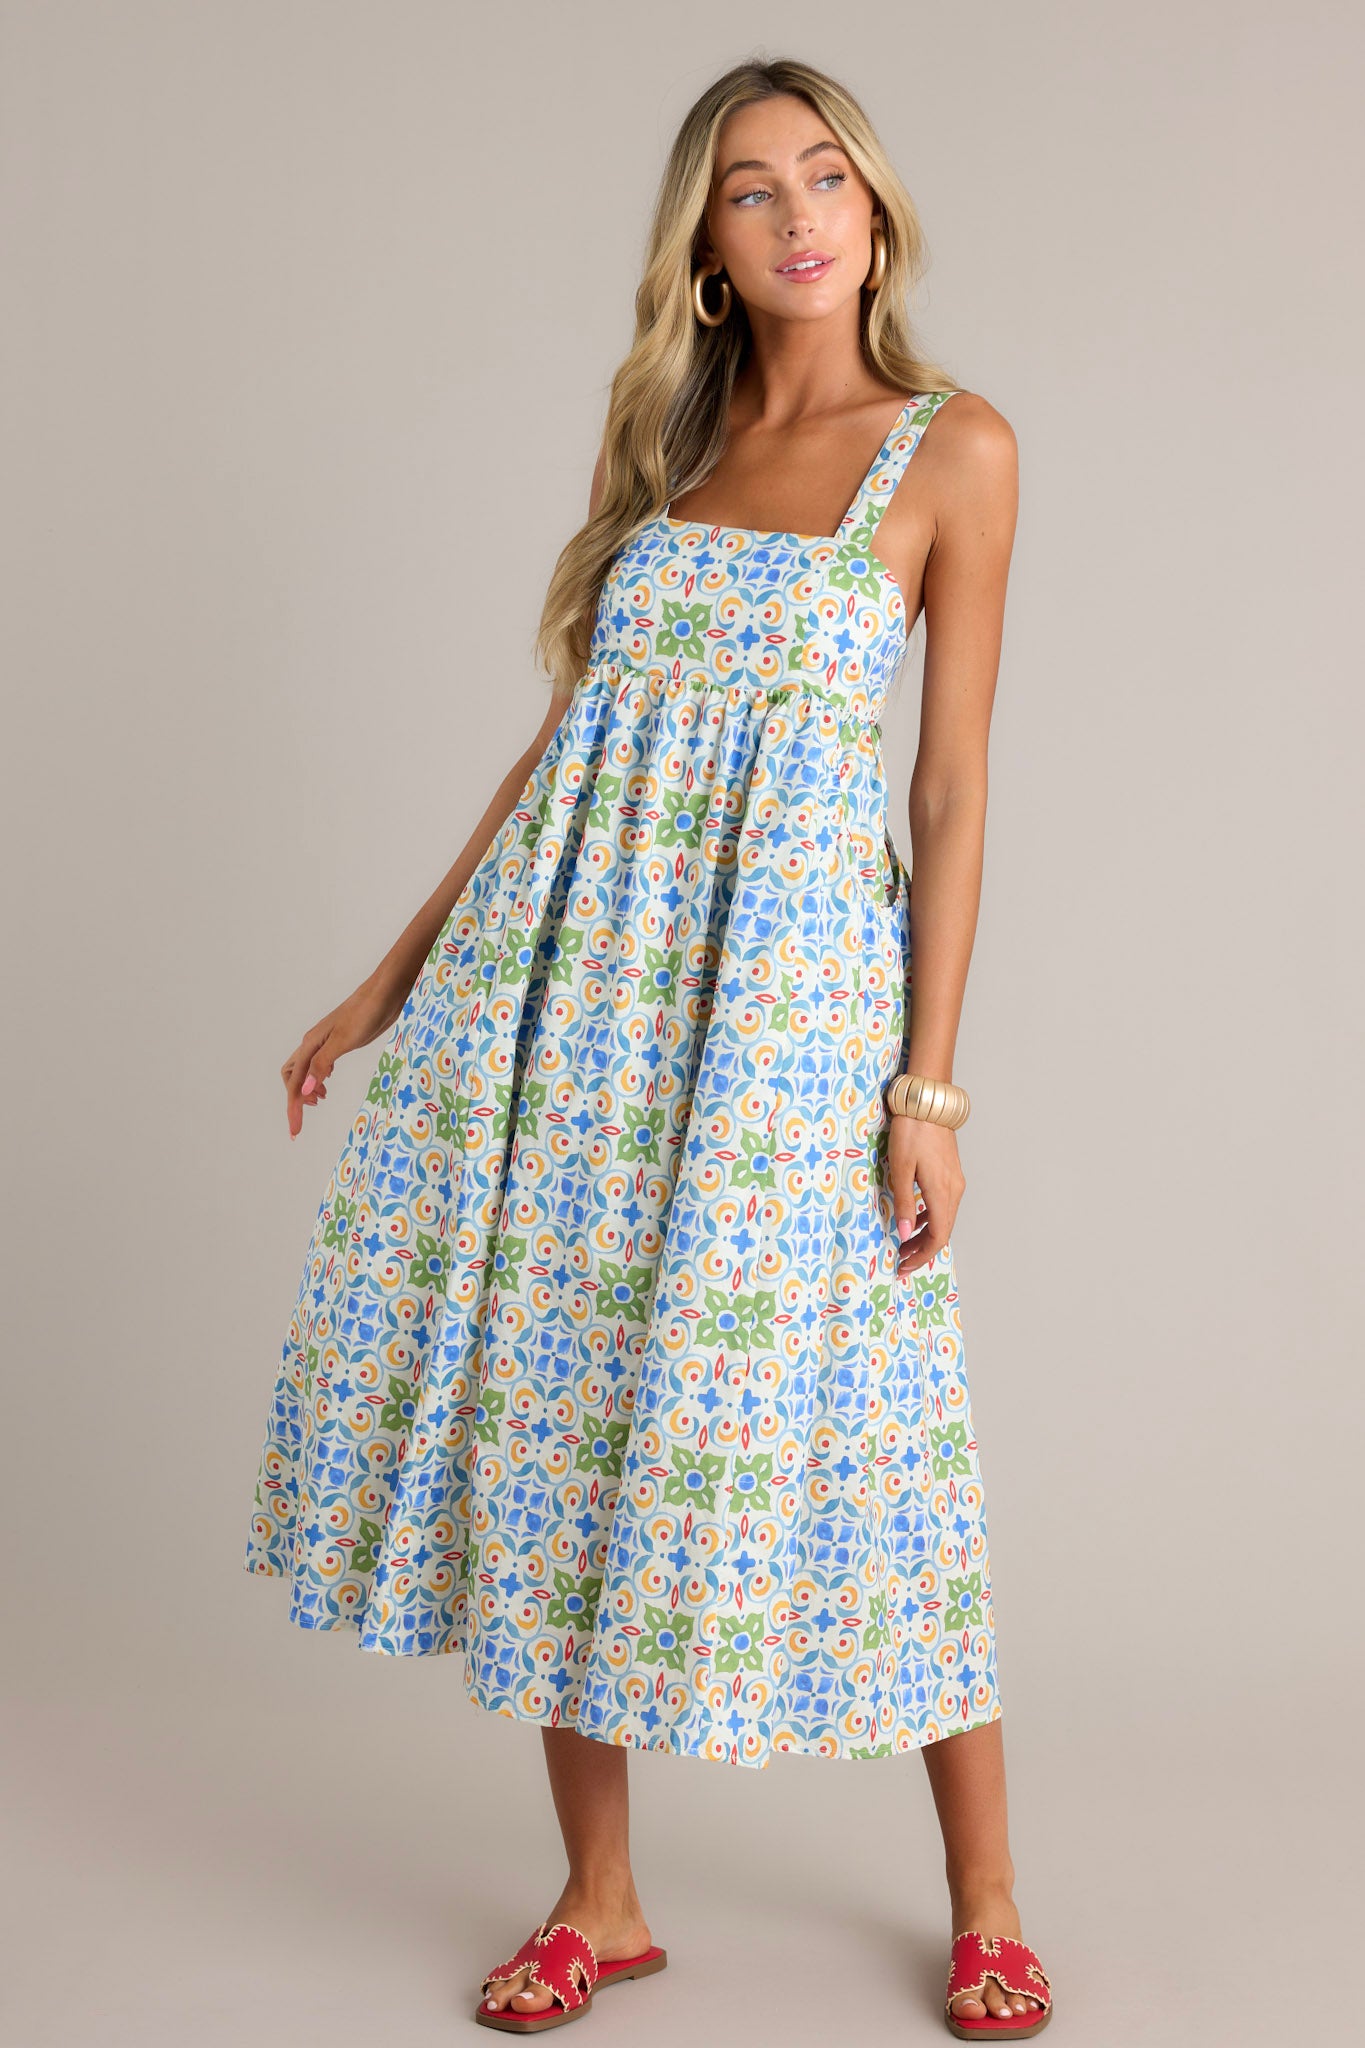 Front angled view of a white midi dress featuring a square neckline, self-tie adjustable straps, a colorful pattern, functional hip pockets, and a flowing silhouette